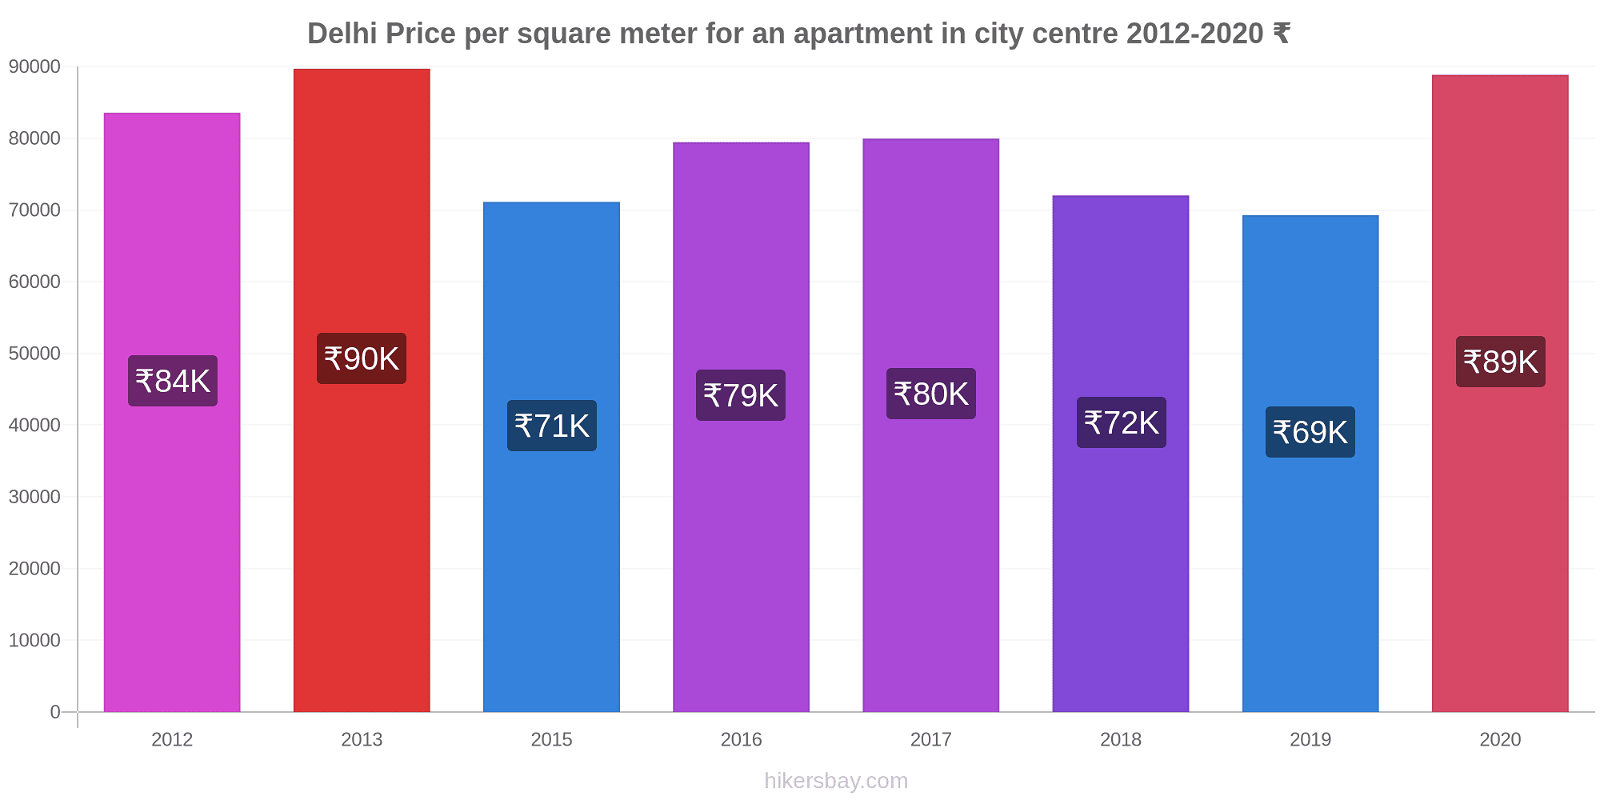 Delhi price changes Price per square meter for an apartment in city centre hikersbay.com